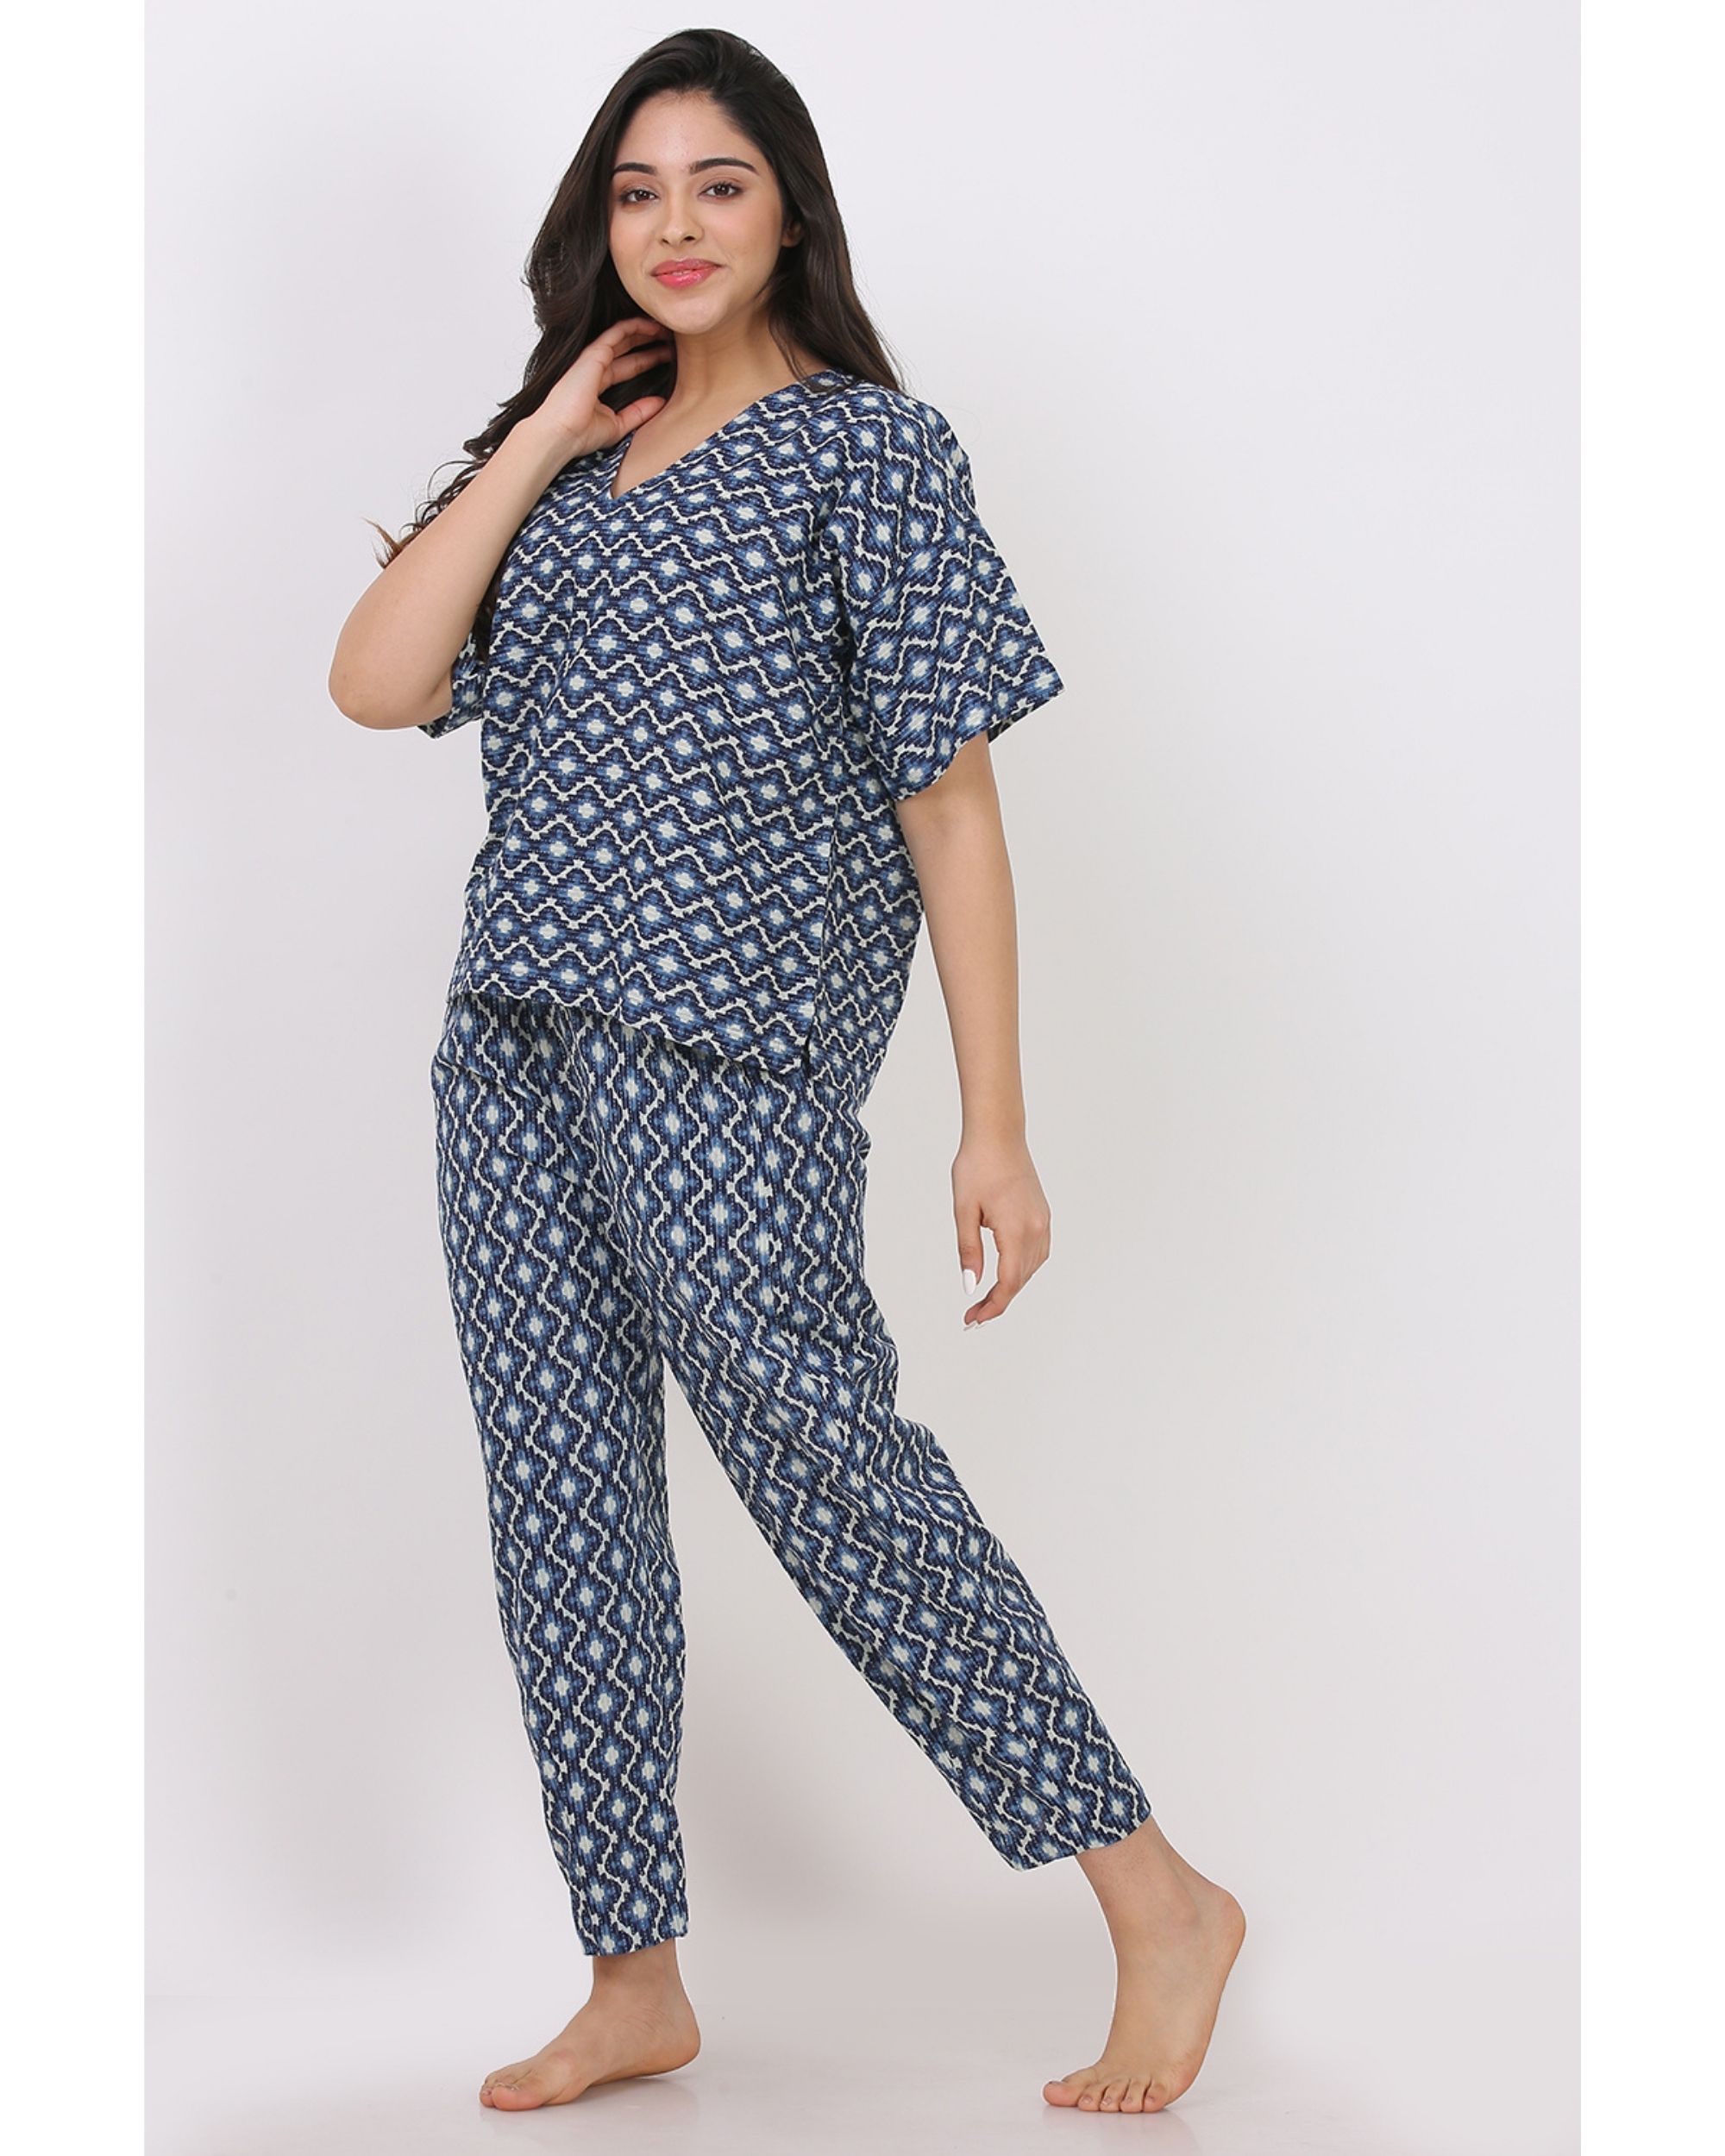 Blue geometric printed top with pants - set of two